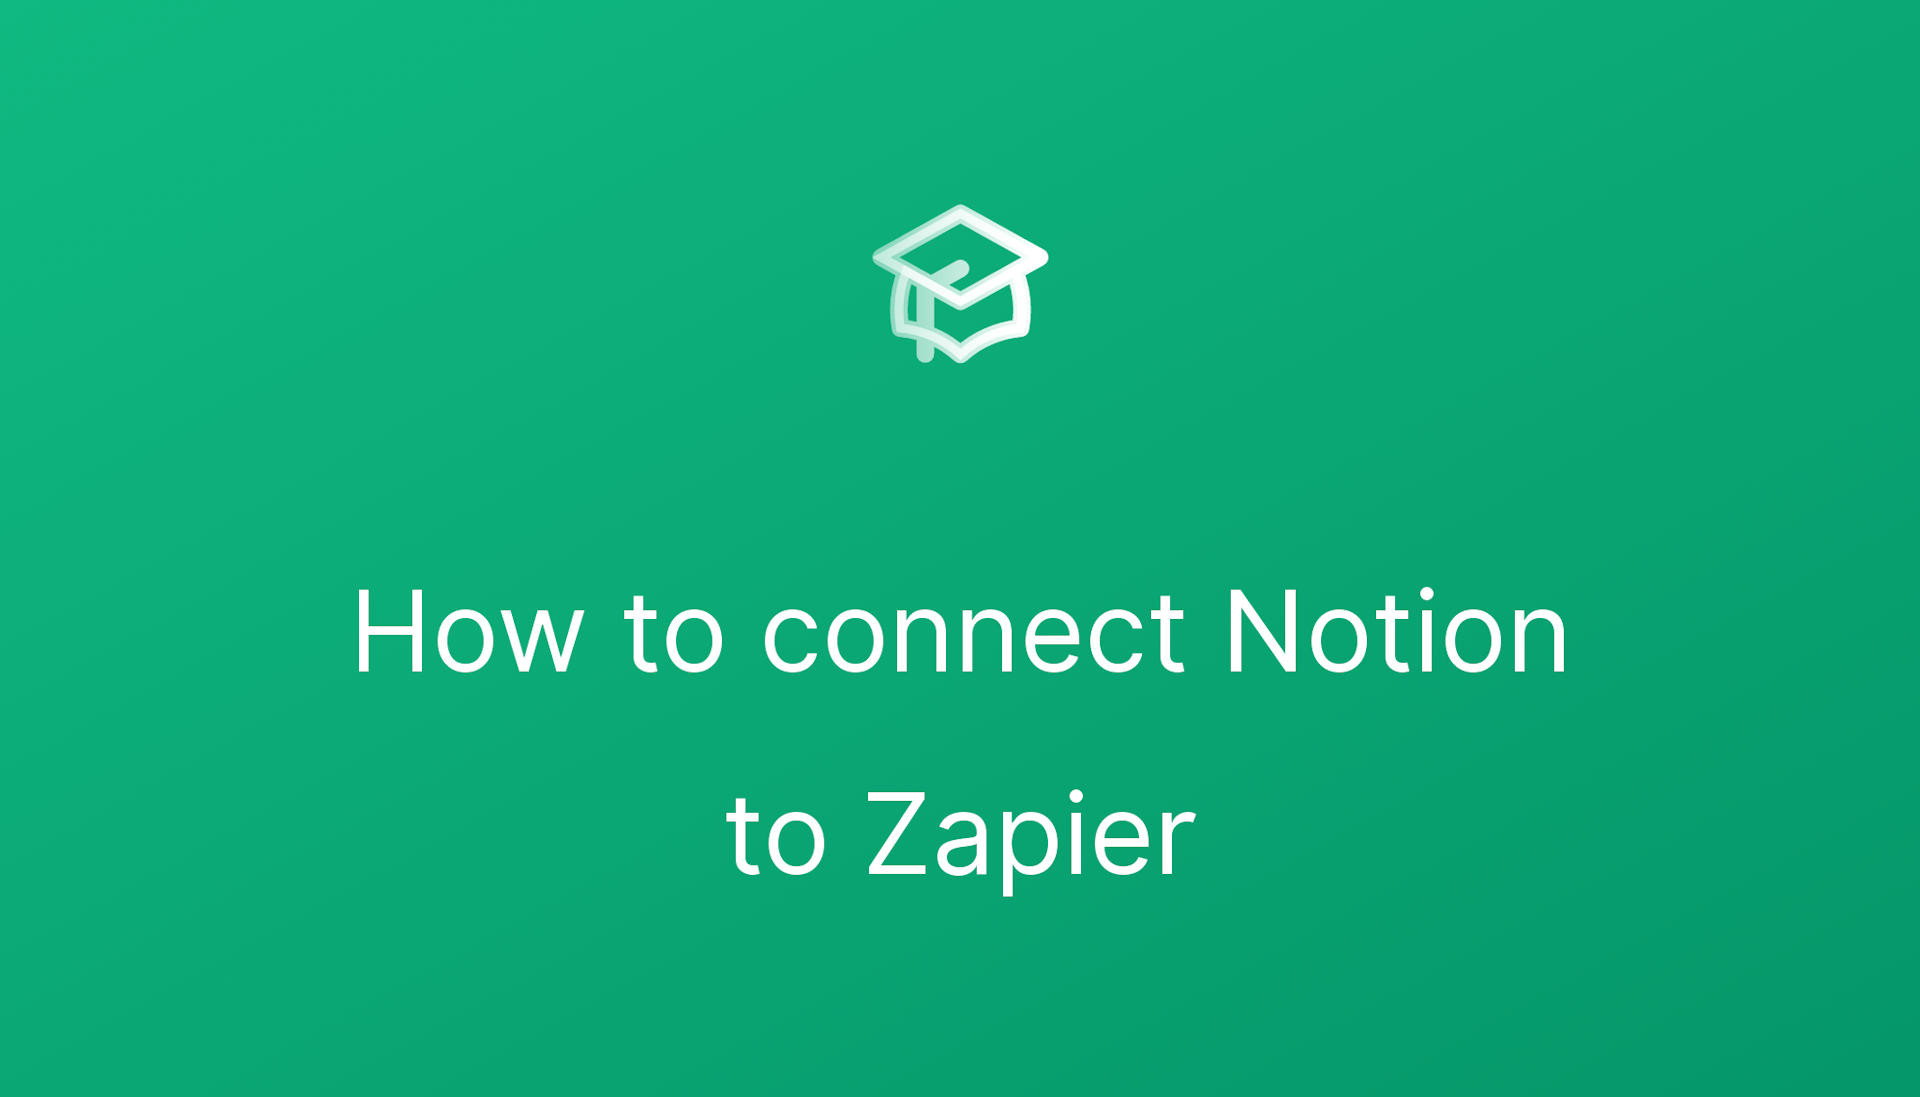 How to connect Notion to Zapier